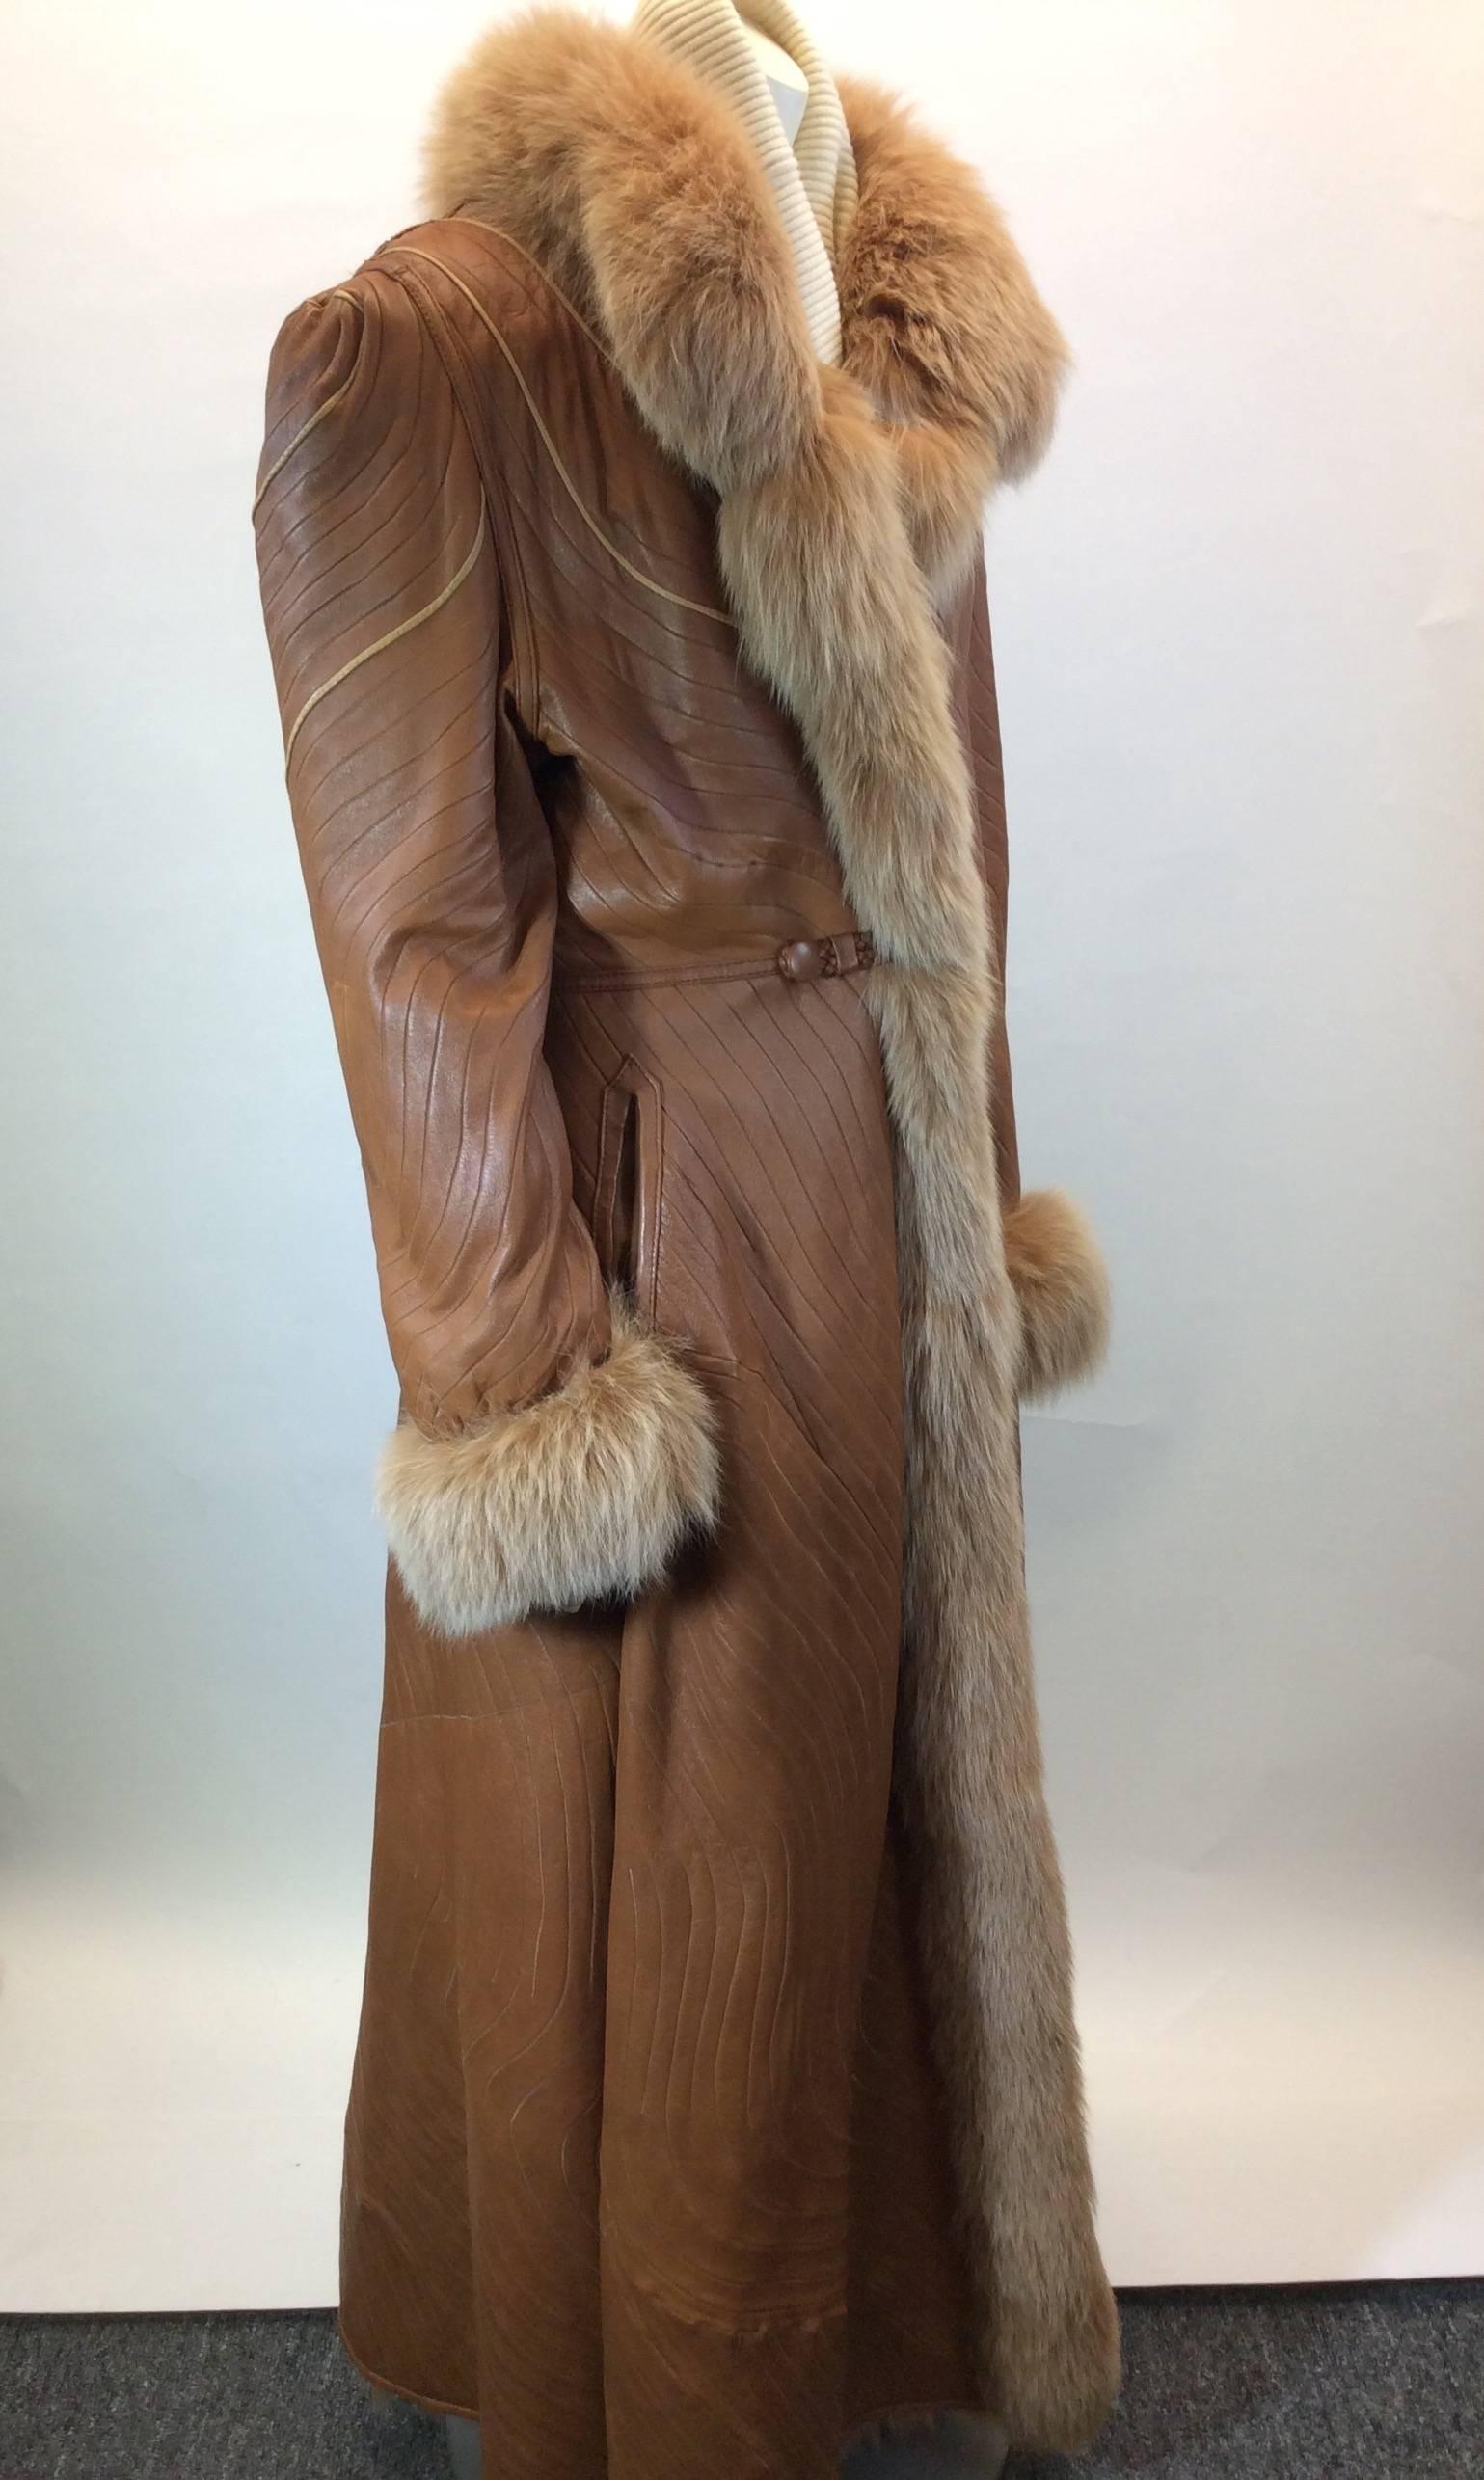 Reversible Coat
100% Genuine Fox Fur on Interior
Multicolored Swirl Fur 
Fox Fur lining on cuffs and collar
27" Inch Sleeve
Leather Rope Tie for Closure